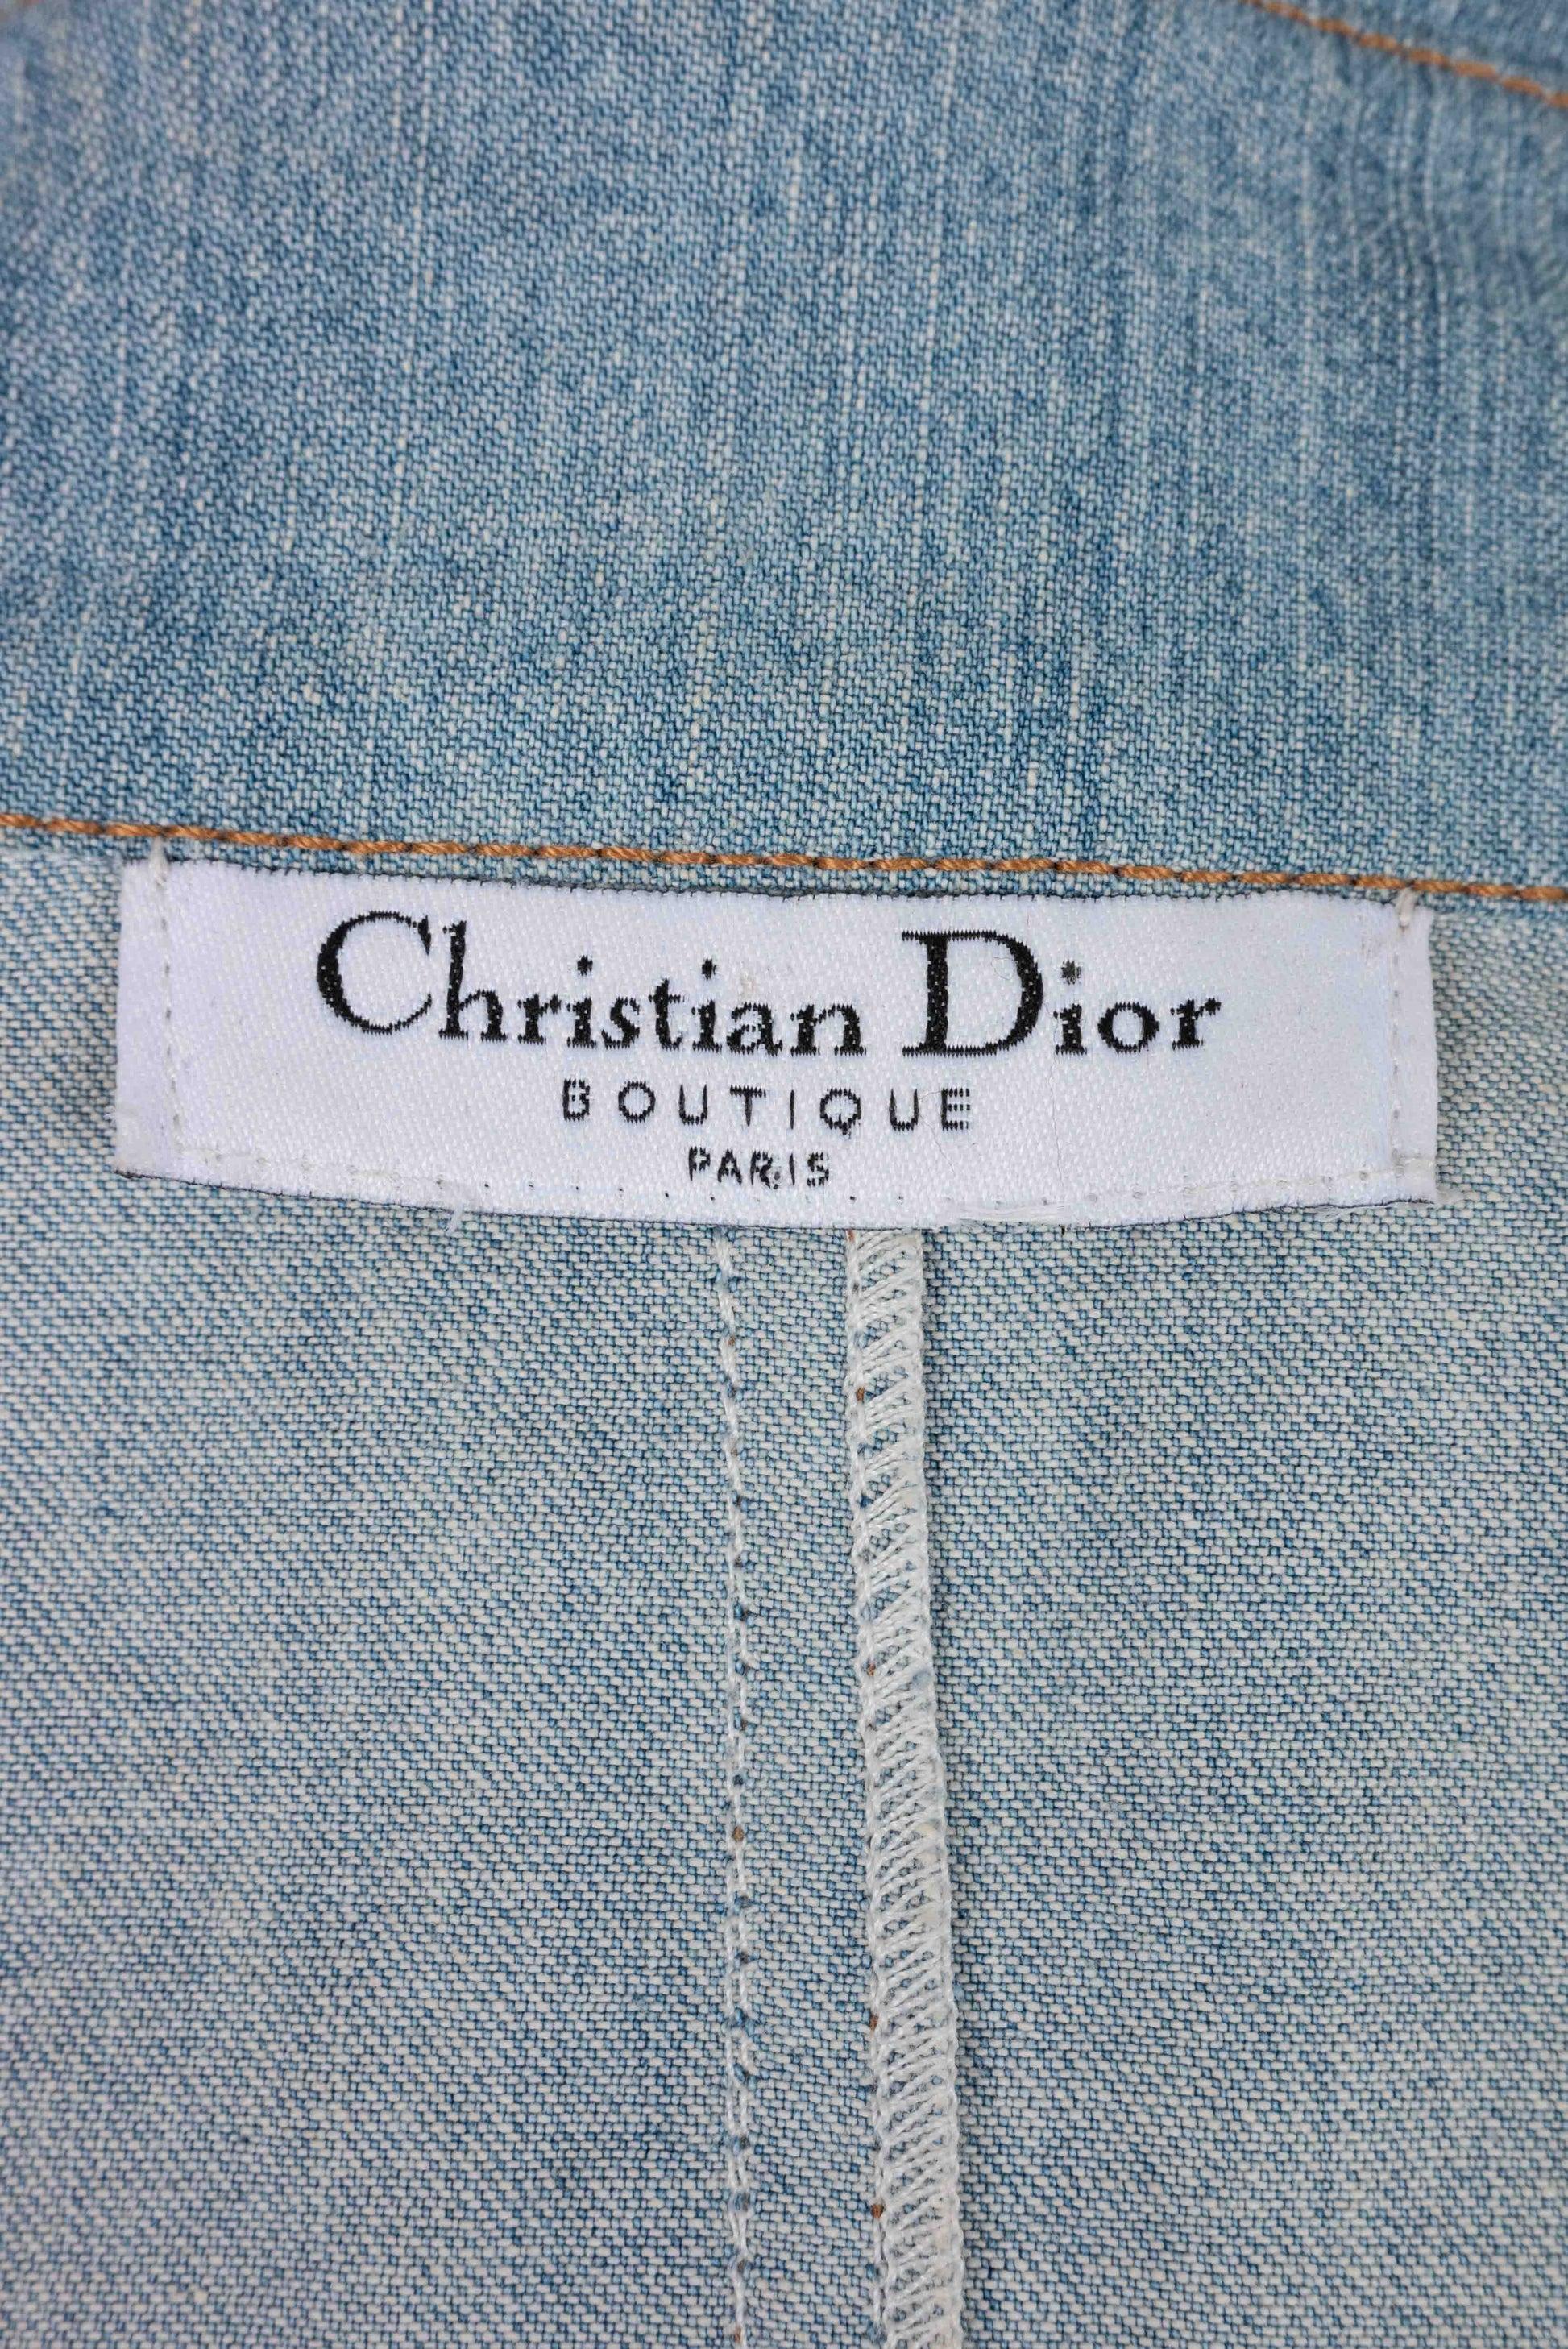 Dior Jacket in Blue Denim and Lace, 2005 For Sale 10